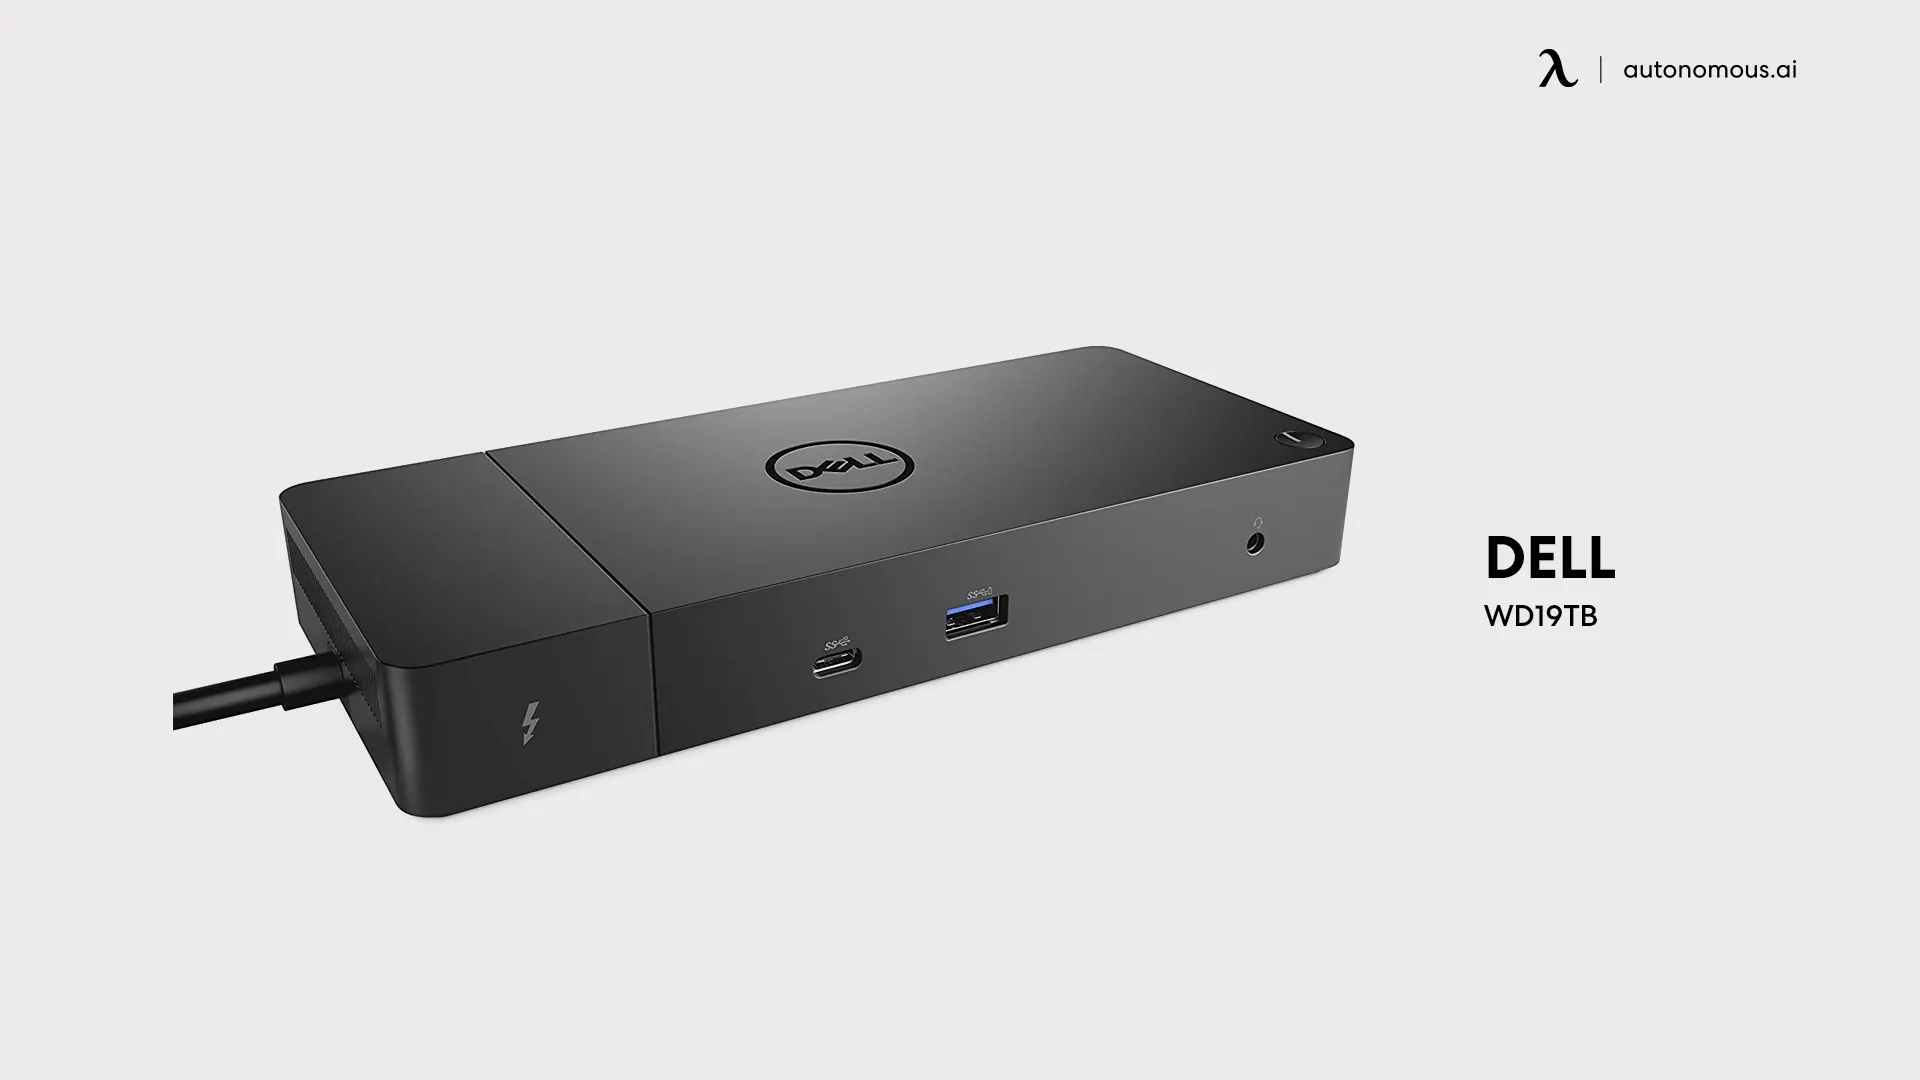 Dell WD19TB MacBook docking station